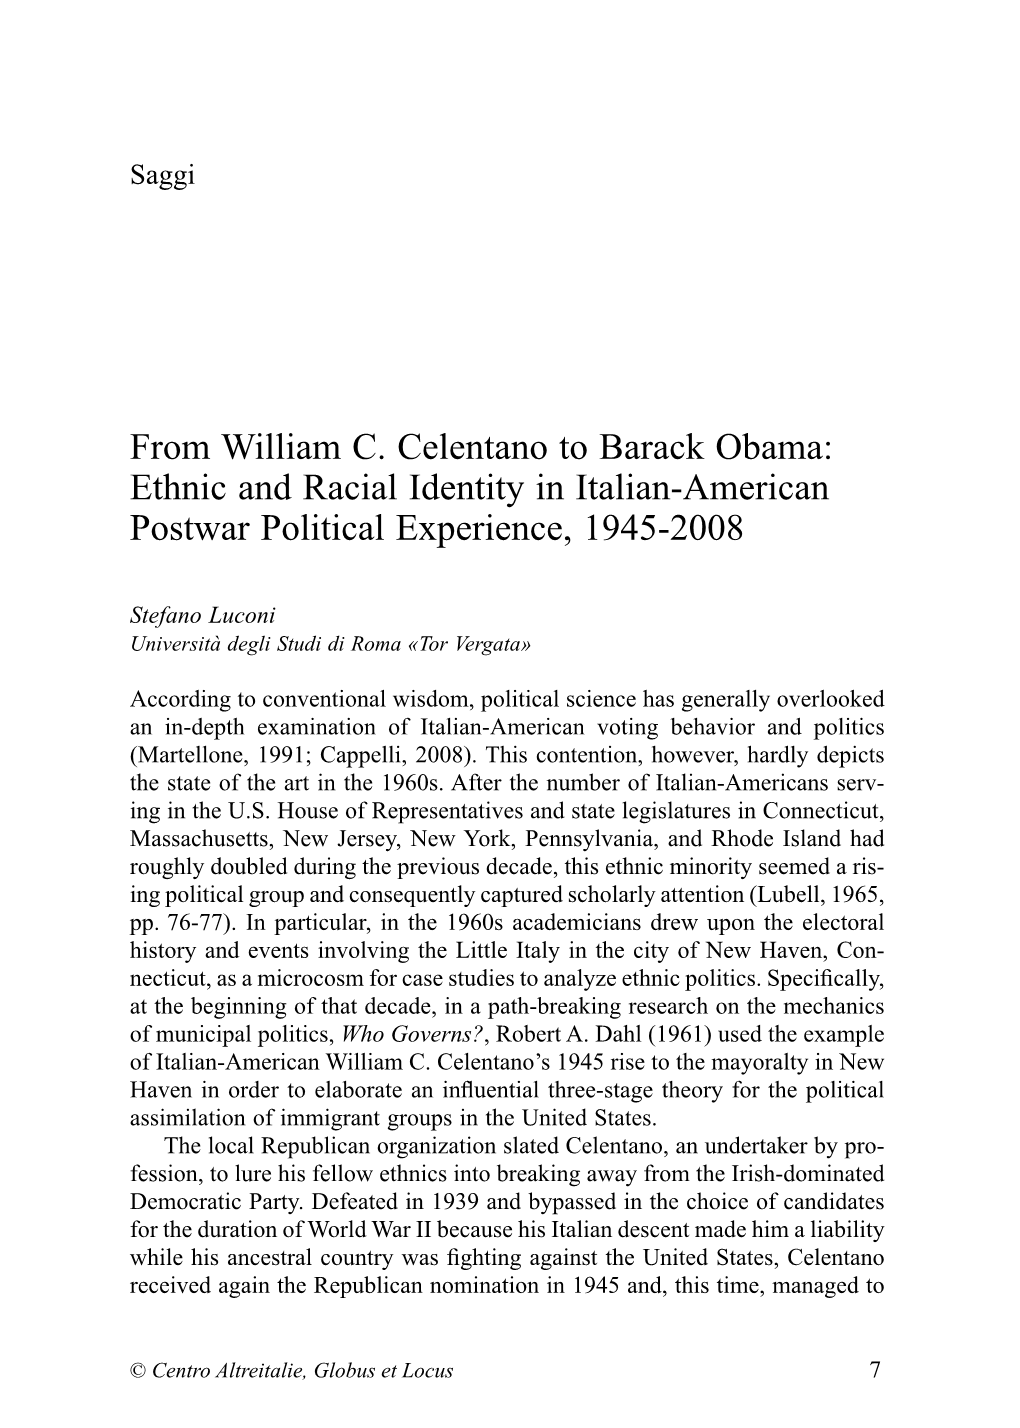 Ethnic and Racial Identity in Italian-American Postwar Political Experience, 1945-2008